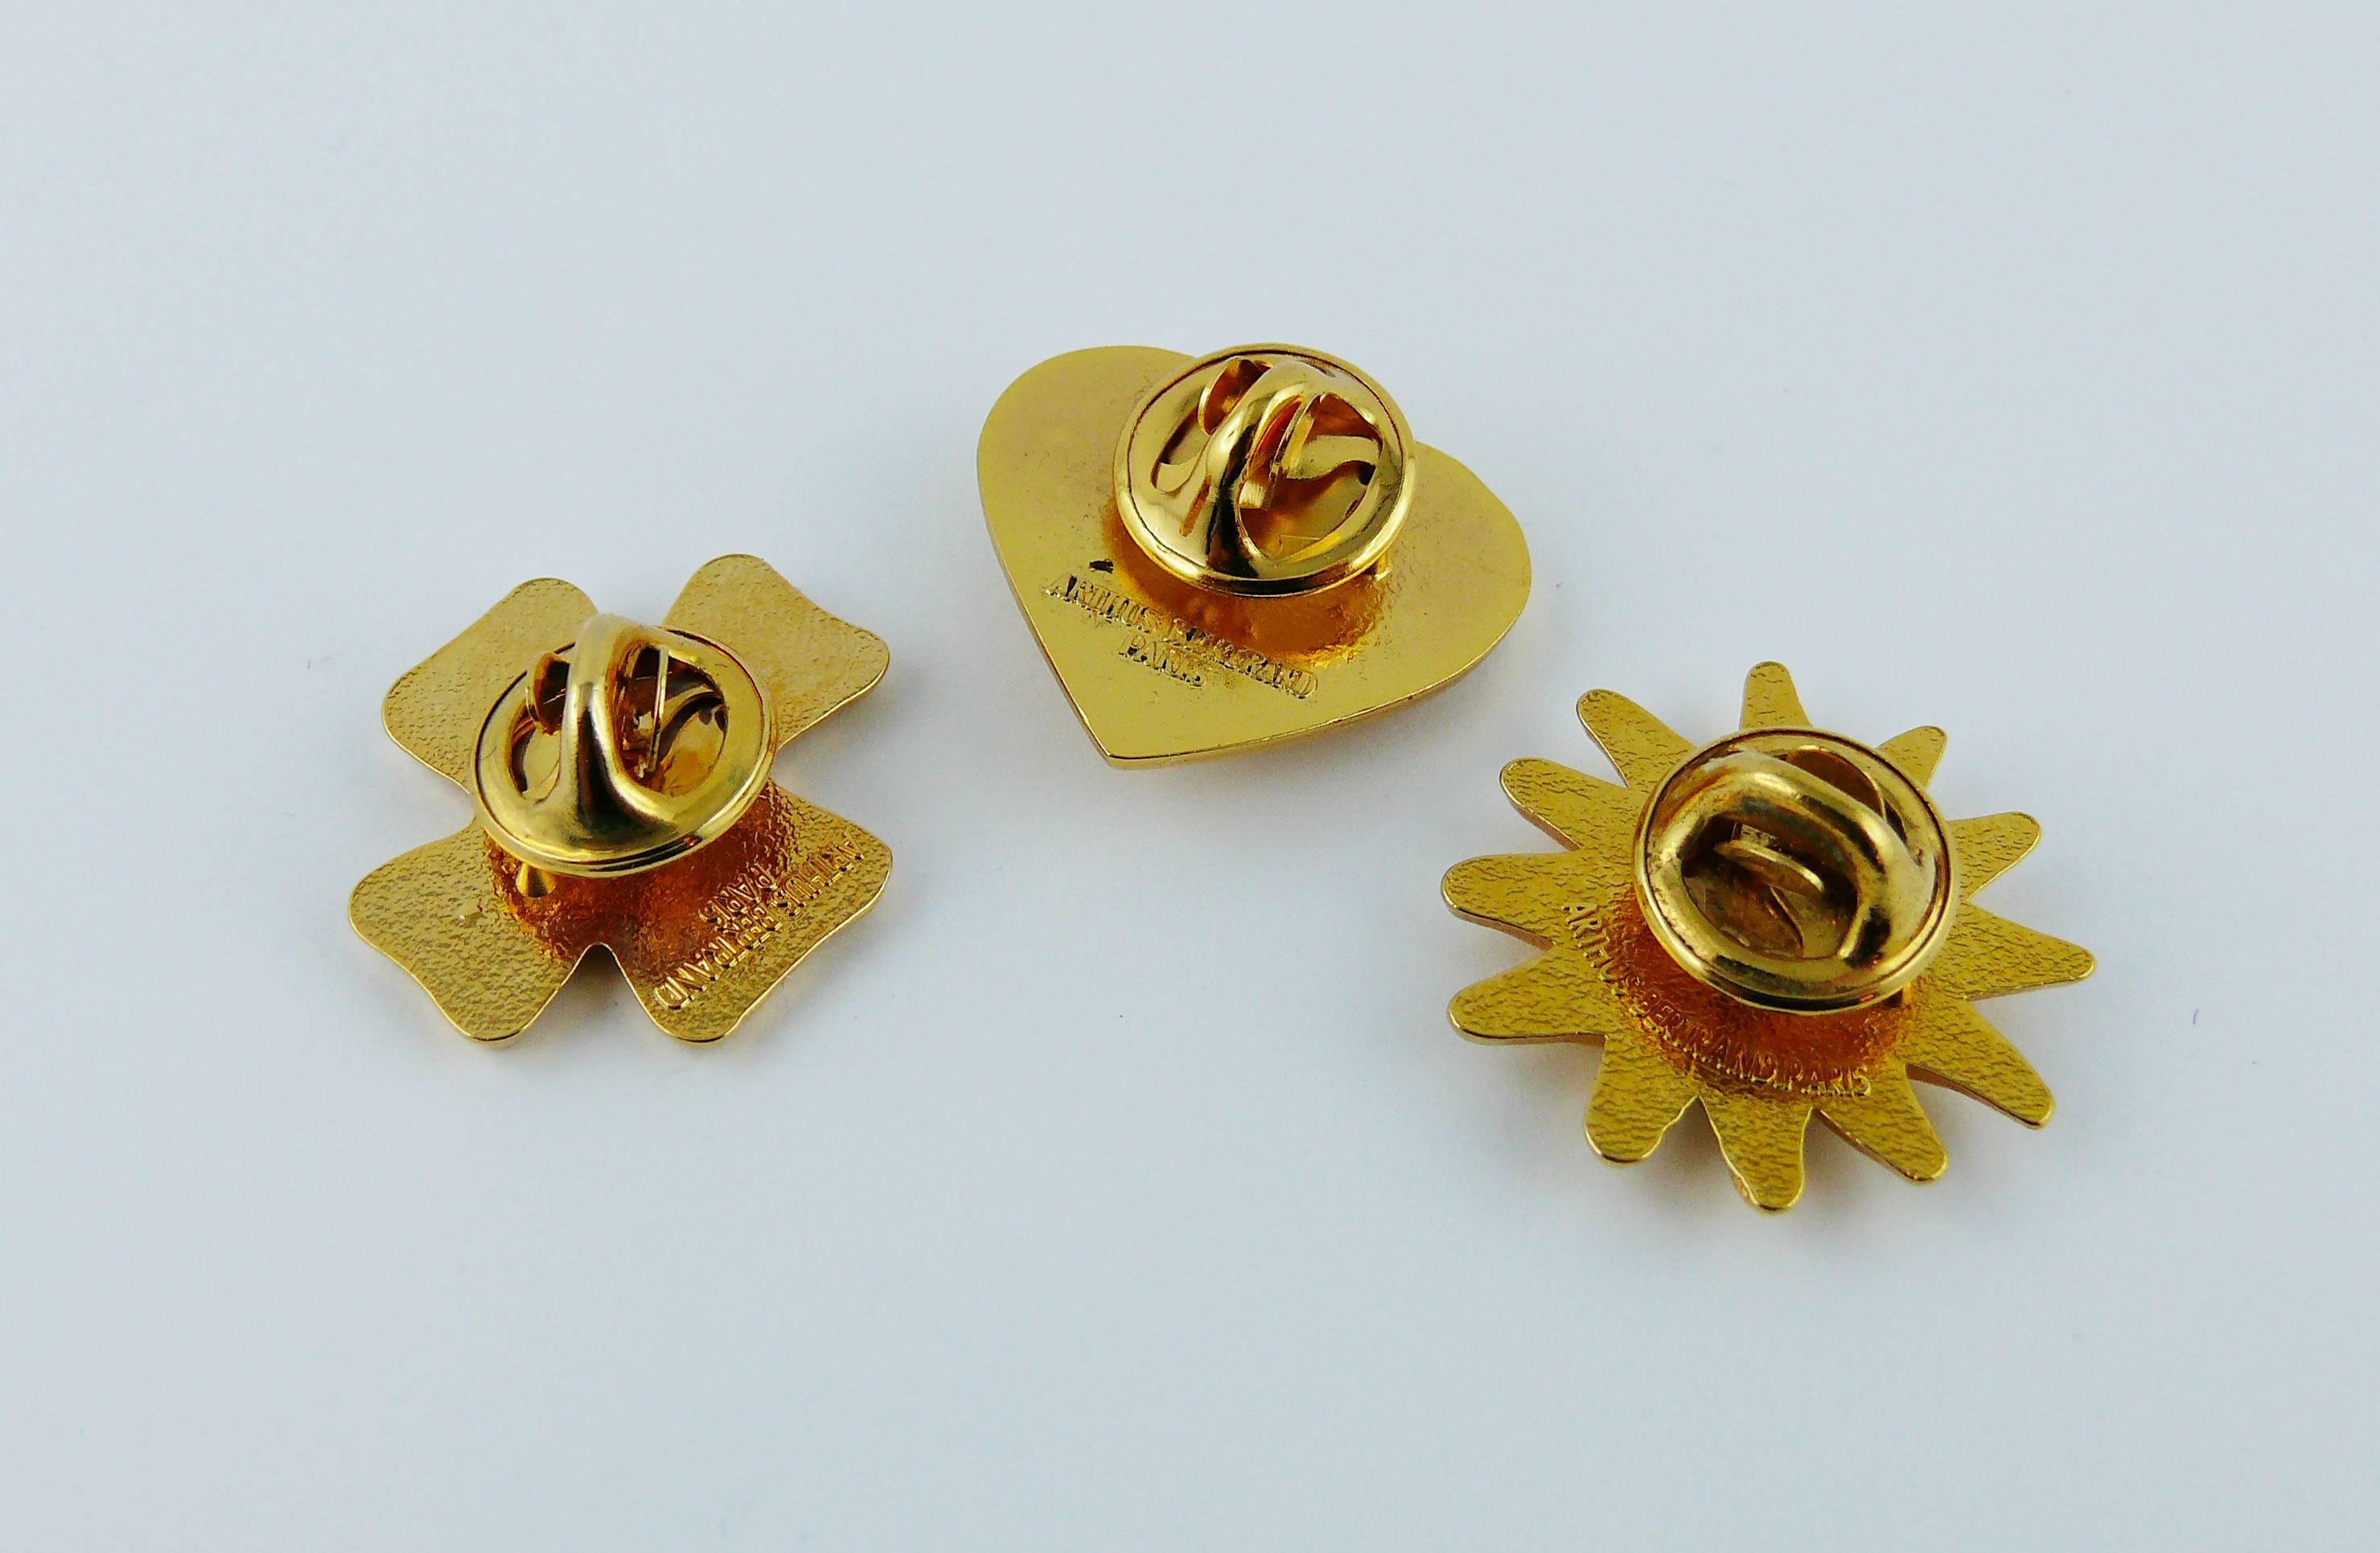 CHRISTIAN LACROIX vintage set of three gold toned iconic symbols pin brooches featuring heart, sun and cross.

Embossed CL.
Marked on the reverse ARTHUS BERTRAND Paris.

Indicative measurements : sun approx. 2.4 cm x 2.3 cm (0.94 x 0.91 inch) /